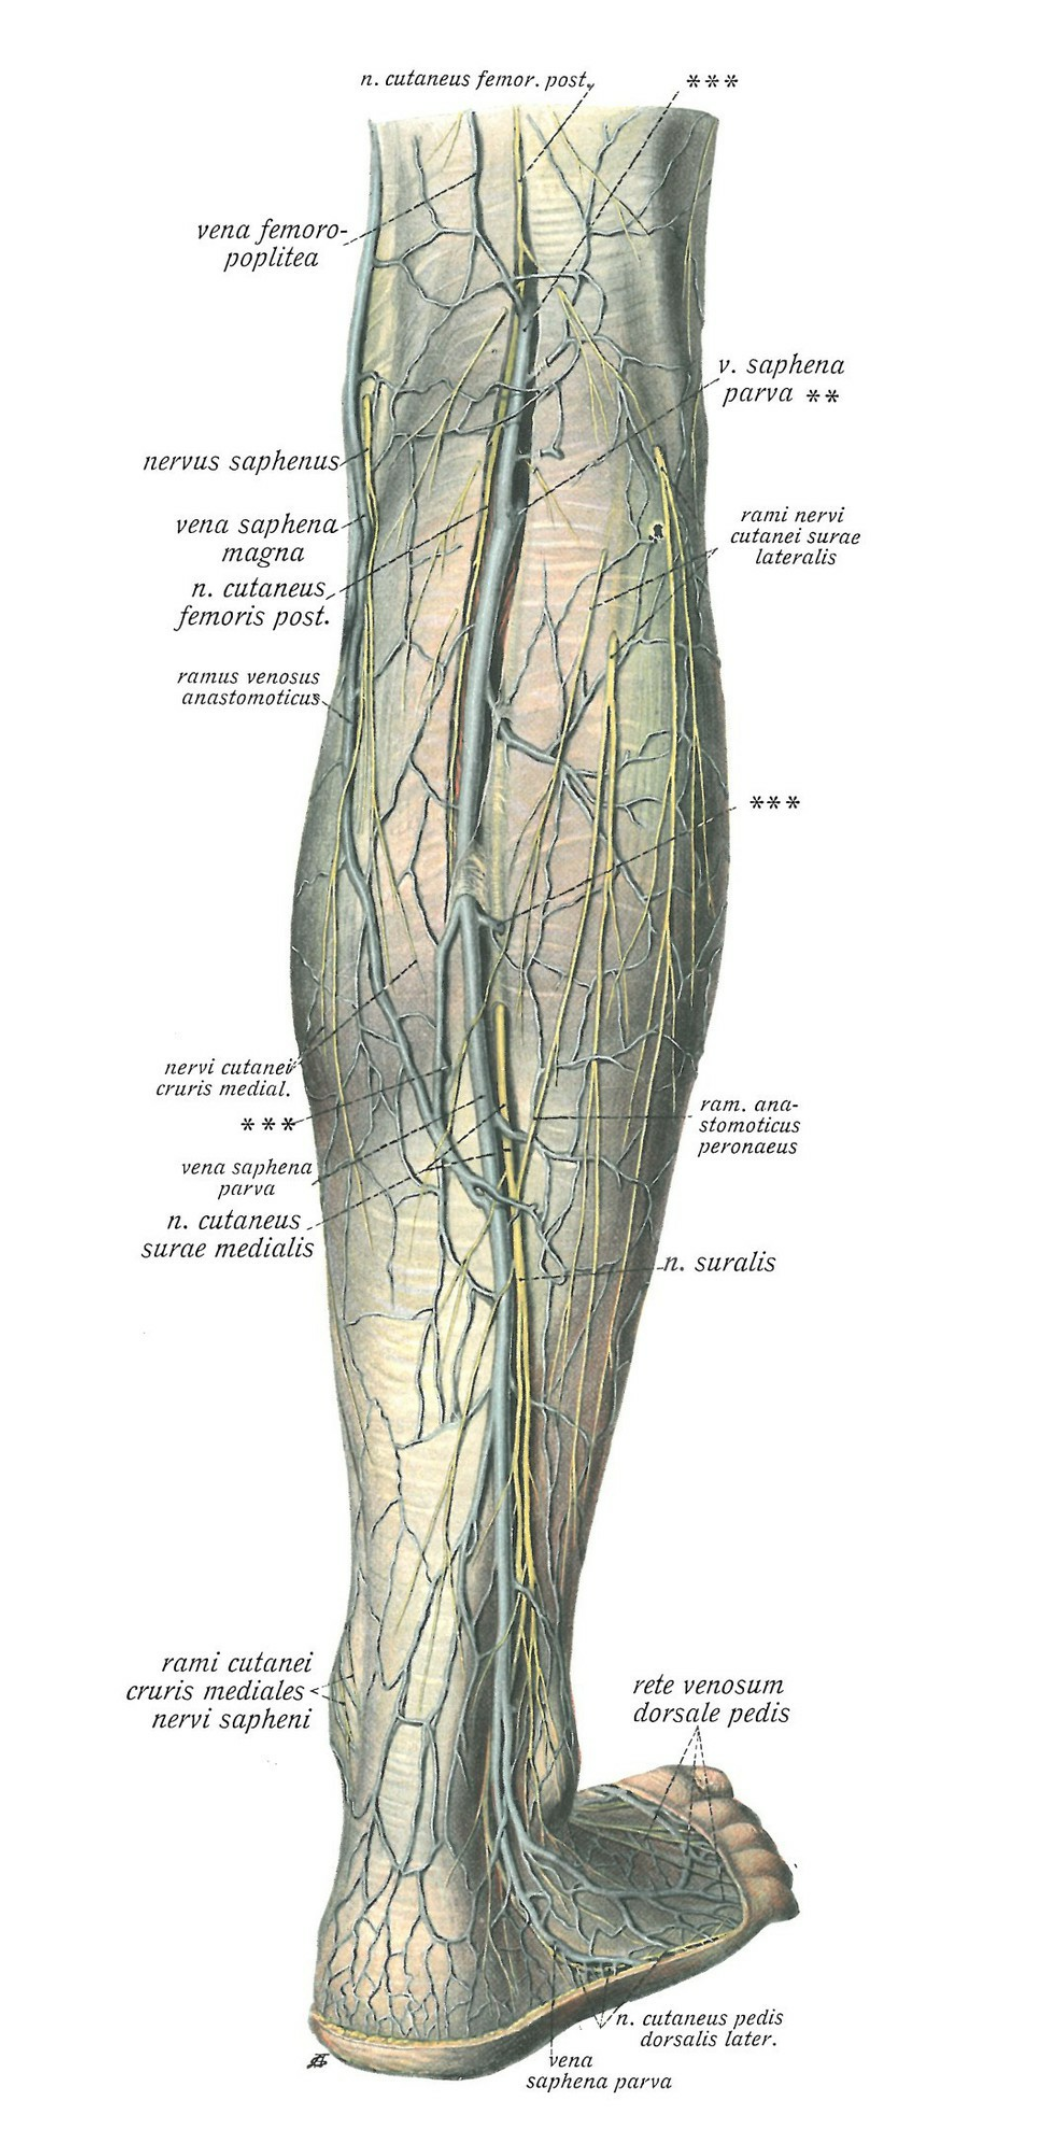  Meanwhile, the lesser saphenous vein, which then joins the popliteal vein, gathers blood from the superficial, posterolateral region of the leg. 